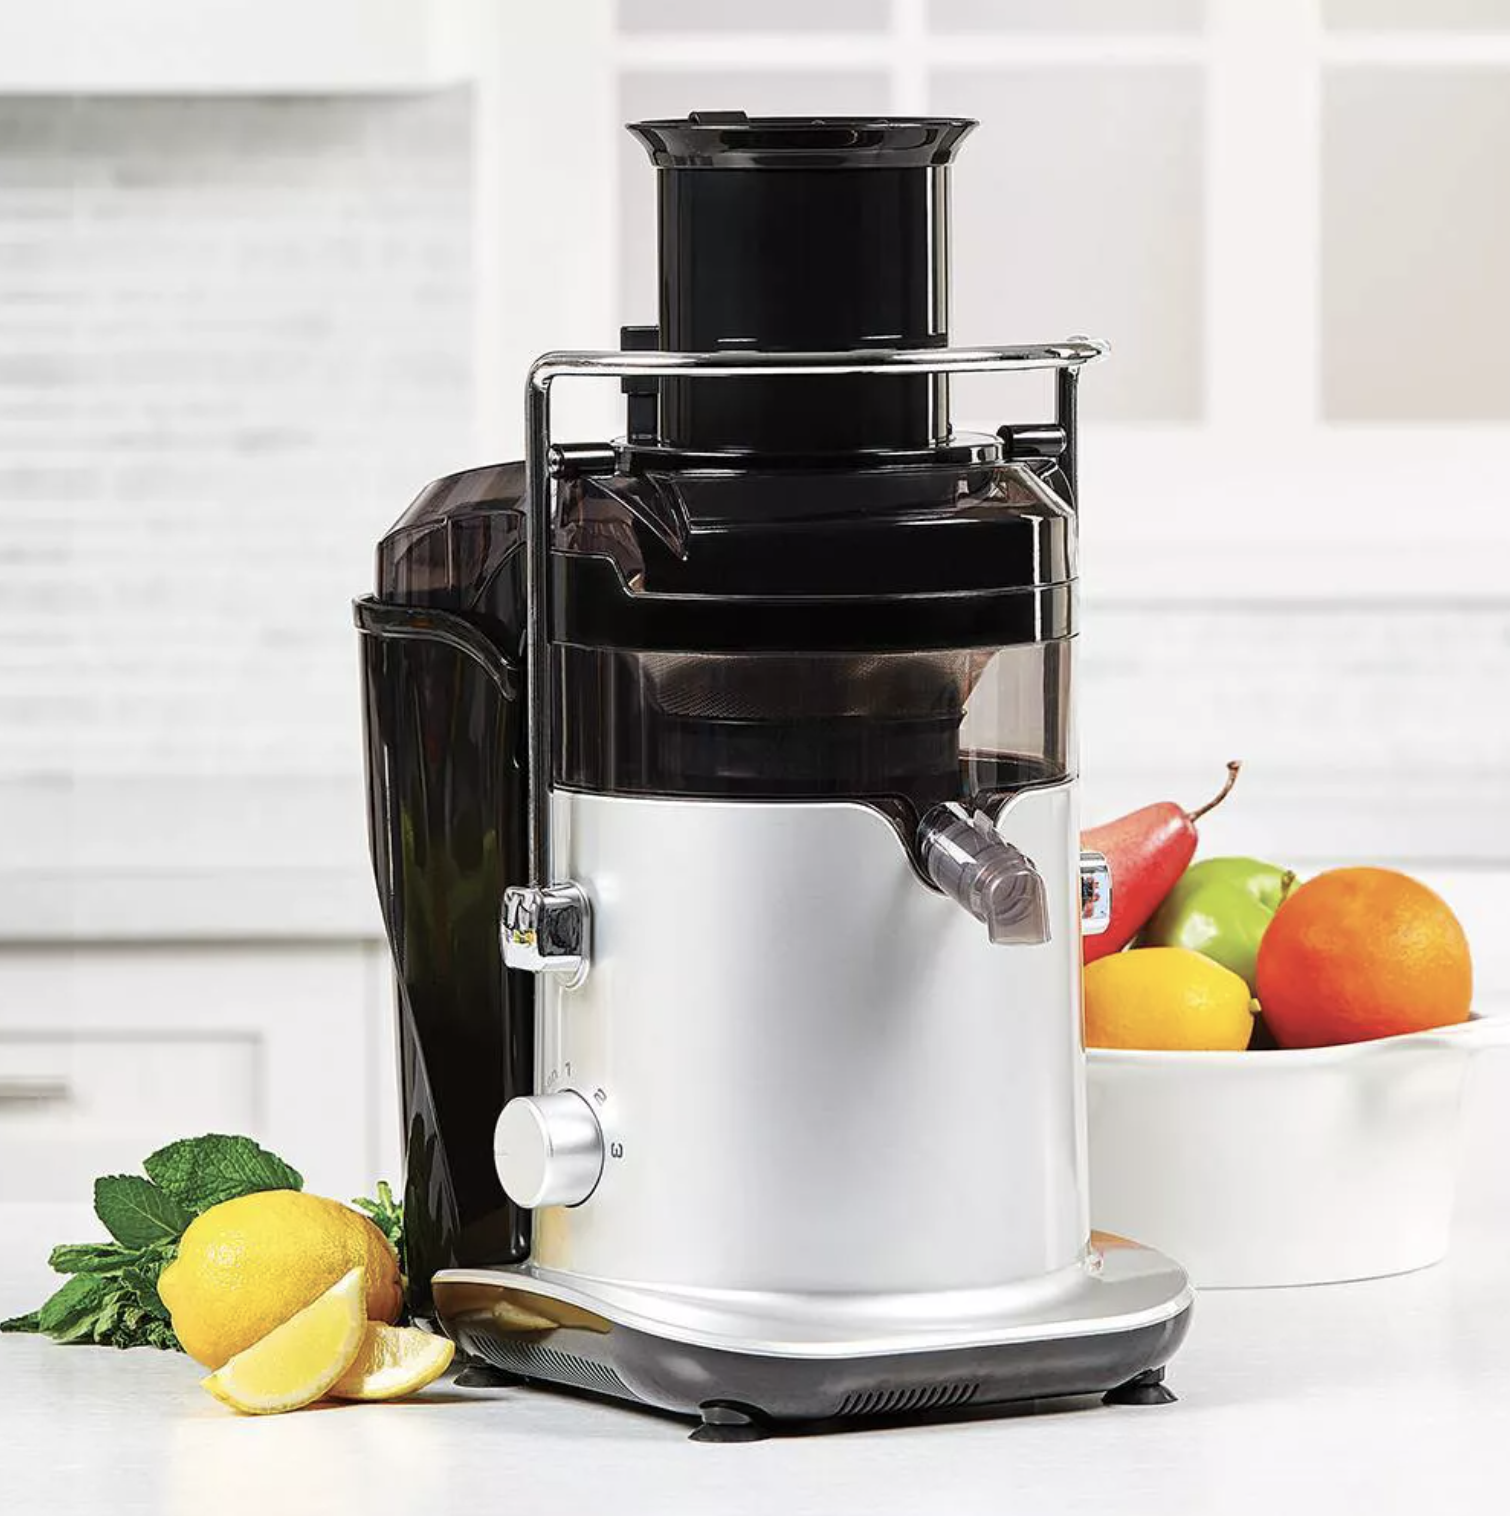 The self-cleaning juicer